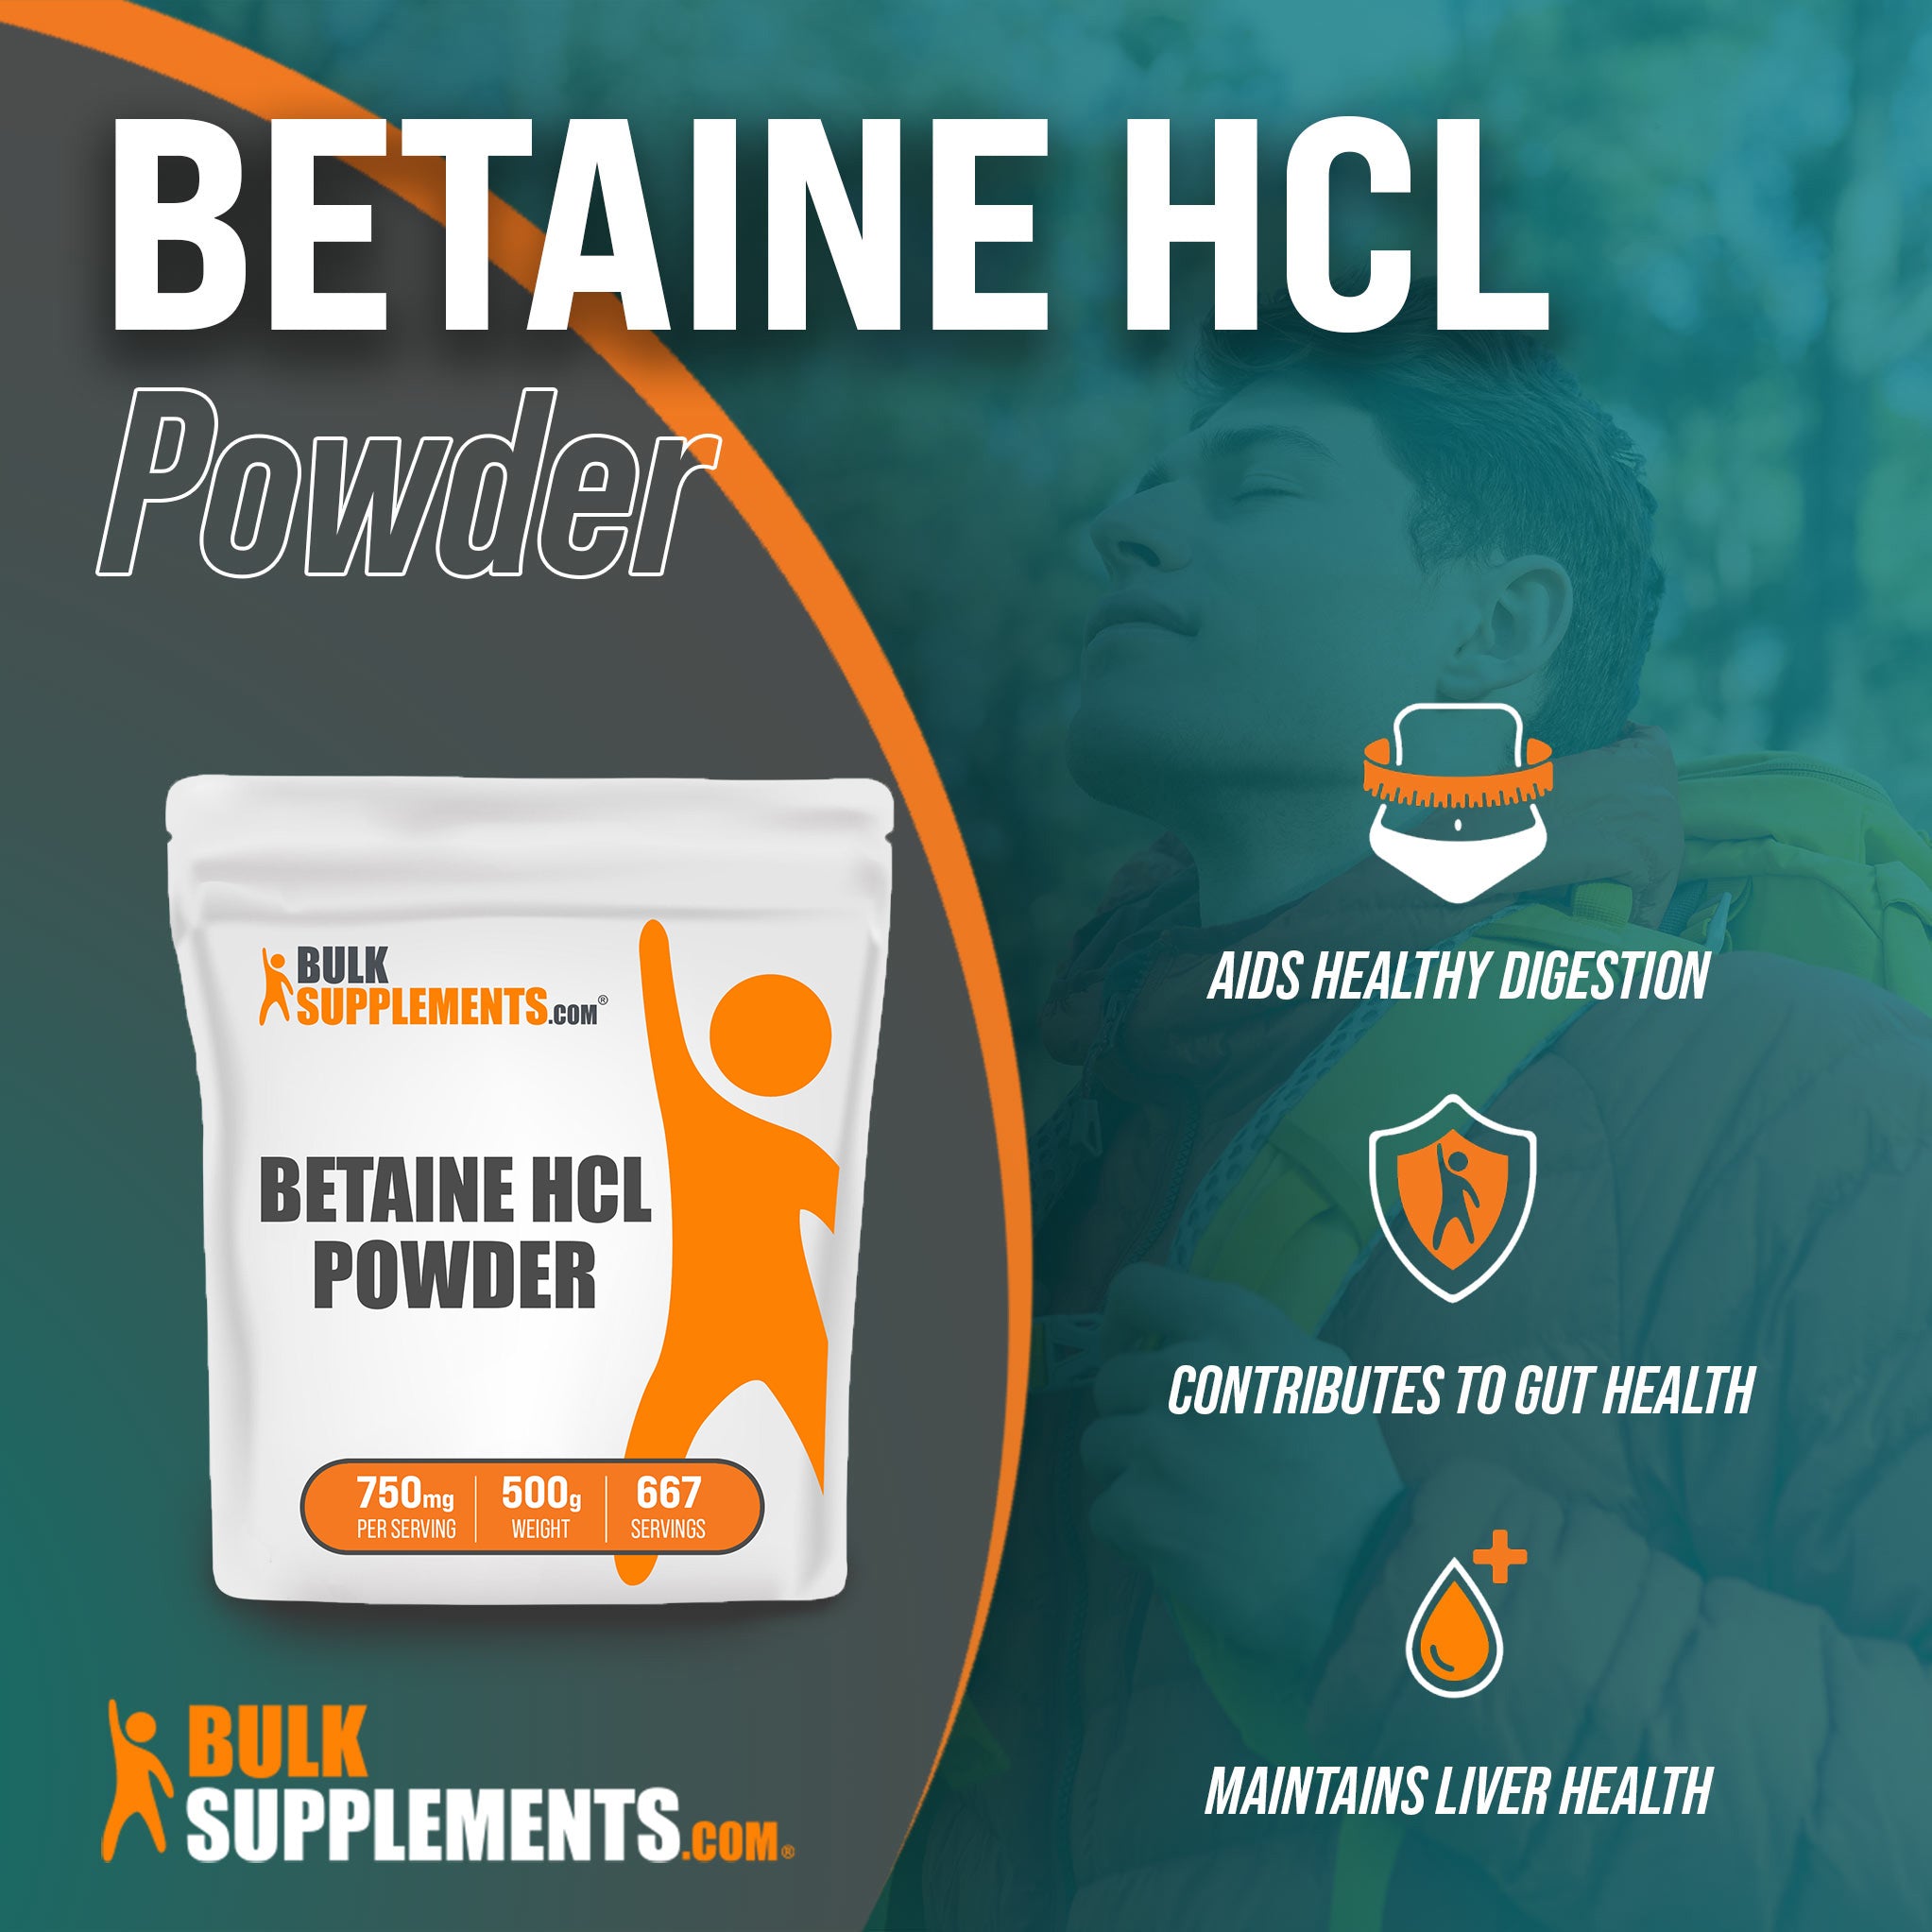 Betaine HCl 500g contains digestive enzymes